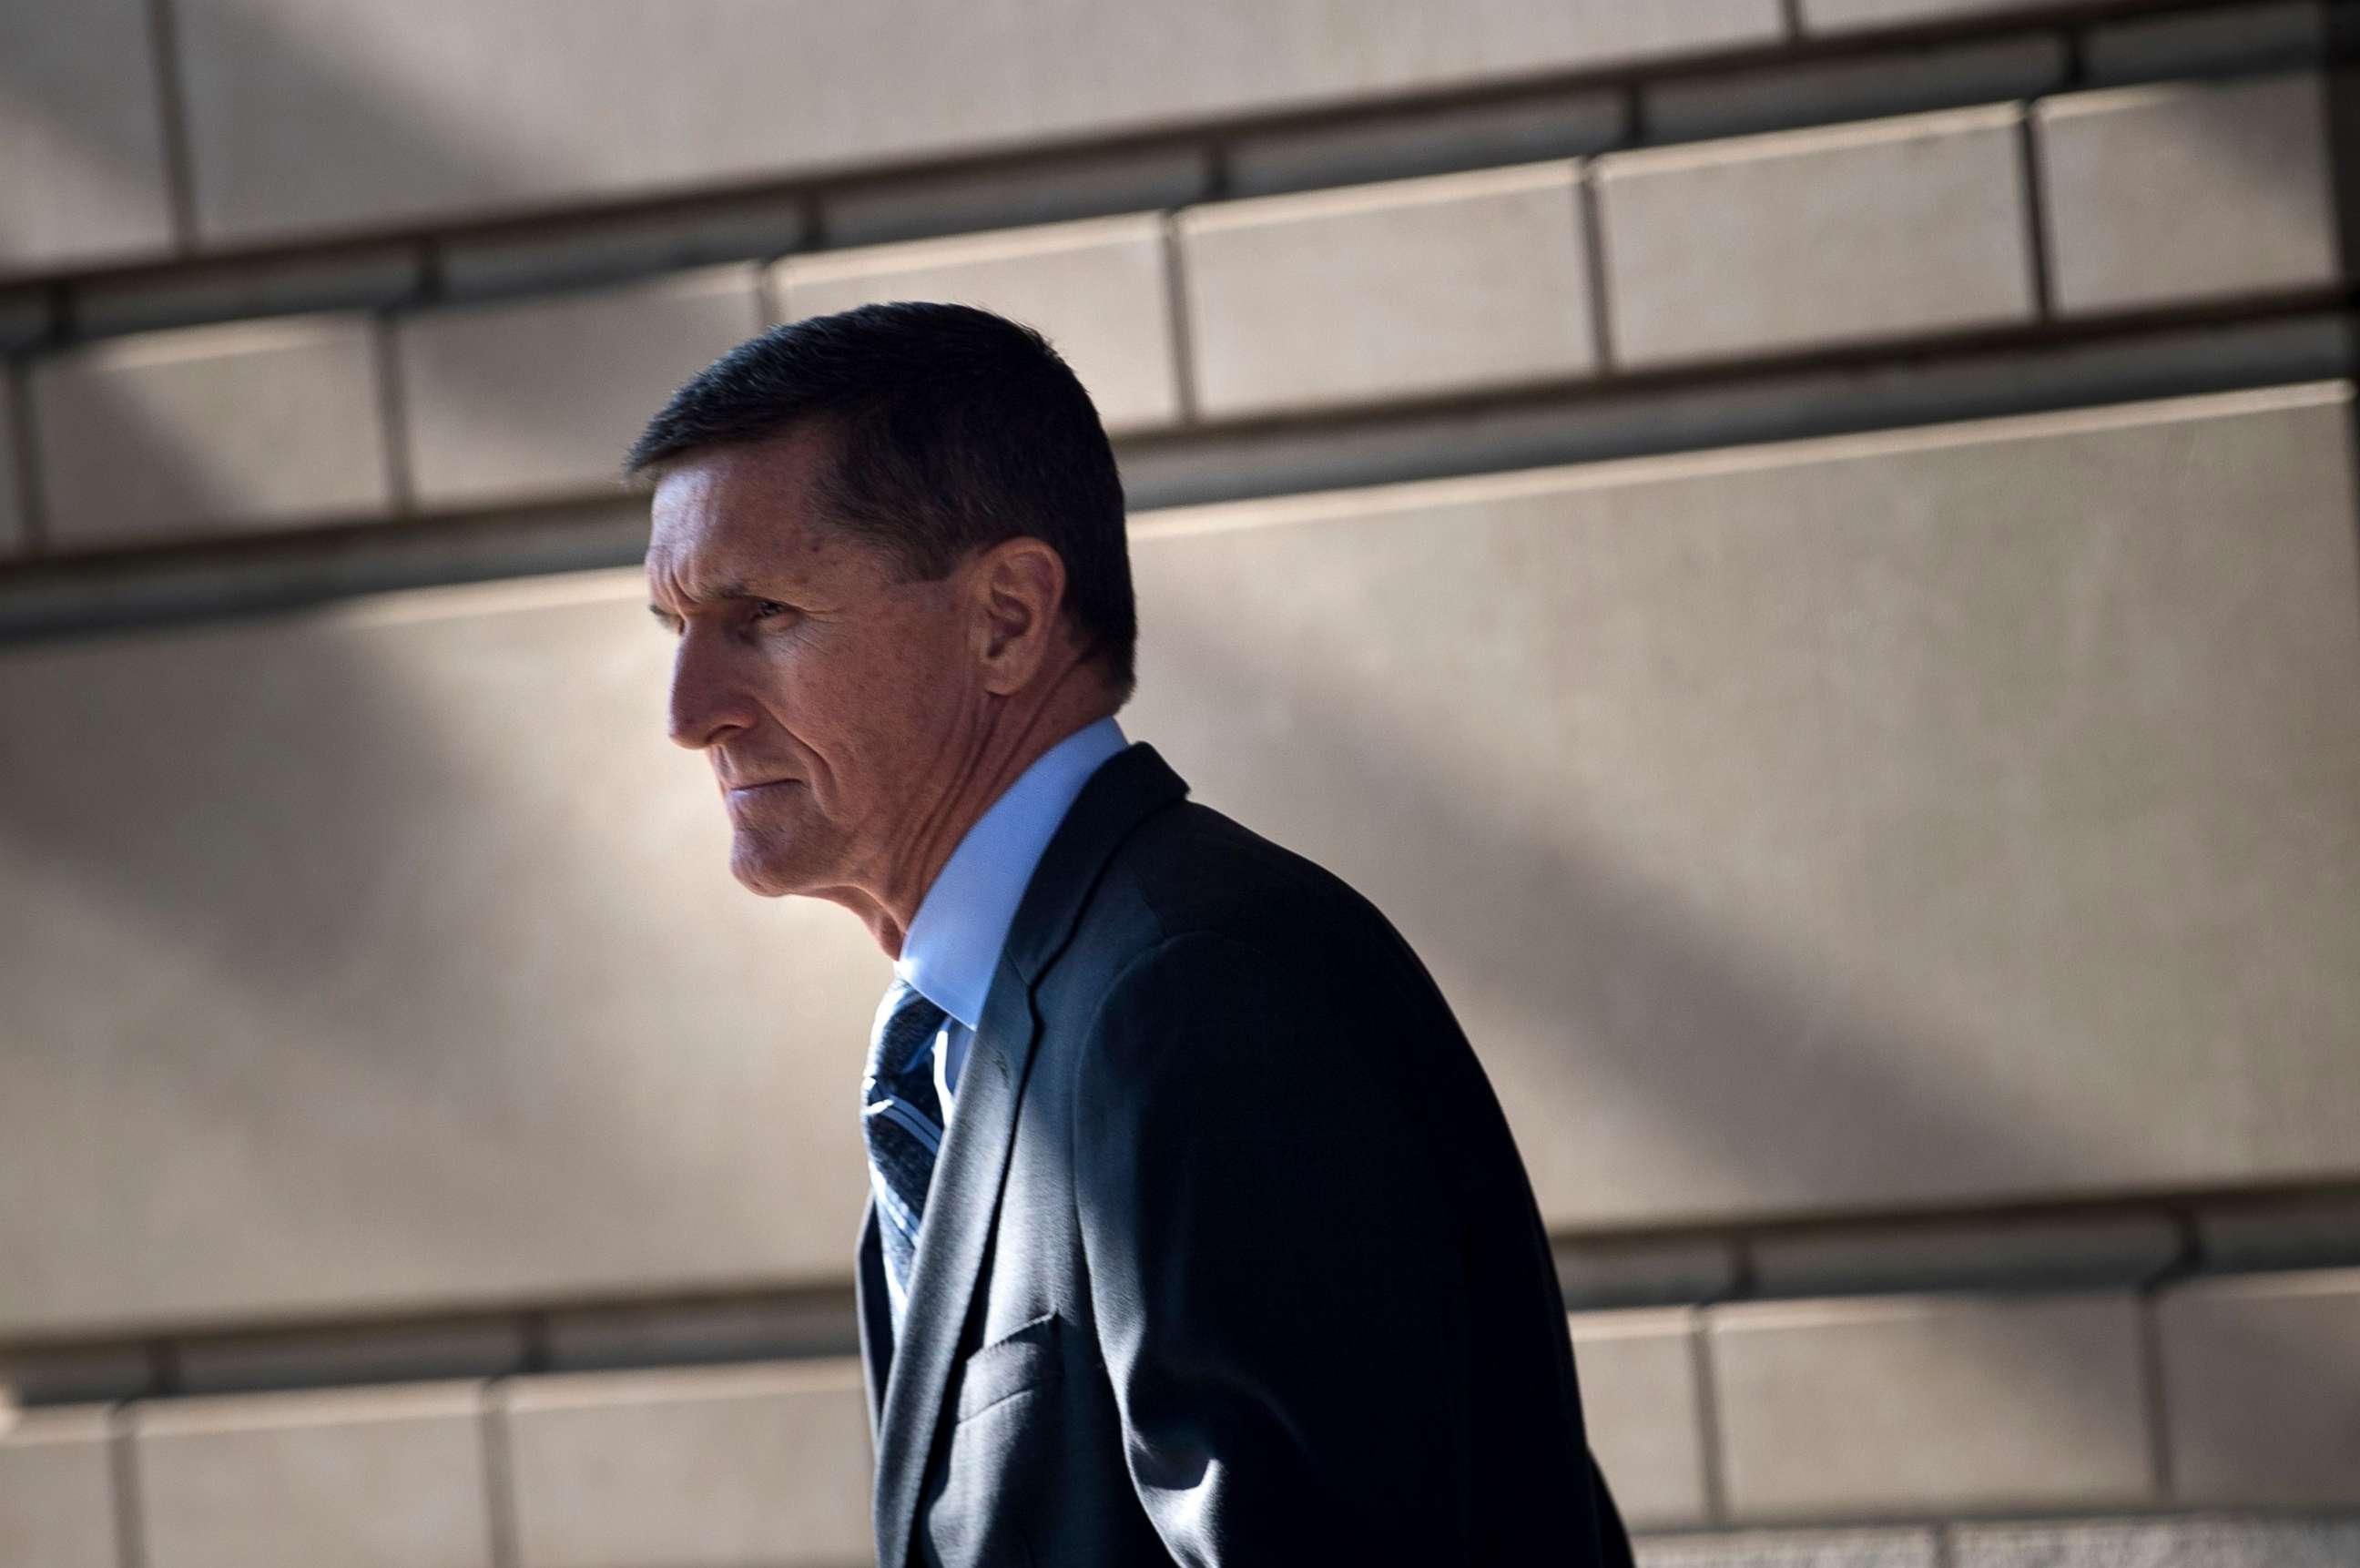 PHOTO: Gen. Michael Flynn, former national security adviser, leaves Federal Court Dec. 1, 2017 in Washington, DC, after he pleaded guilty to one count of lying to the FBI about his back-channel negotiations with the Russian ambassador.  